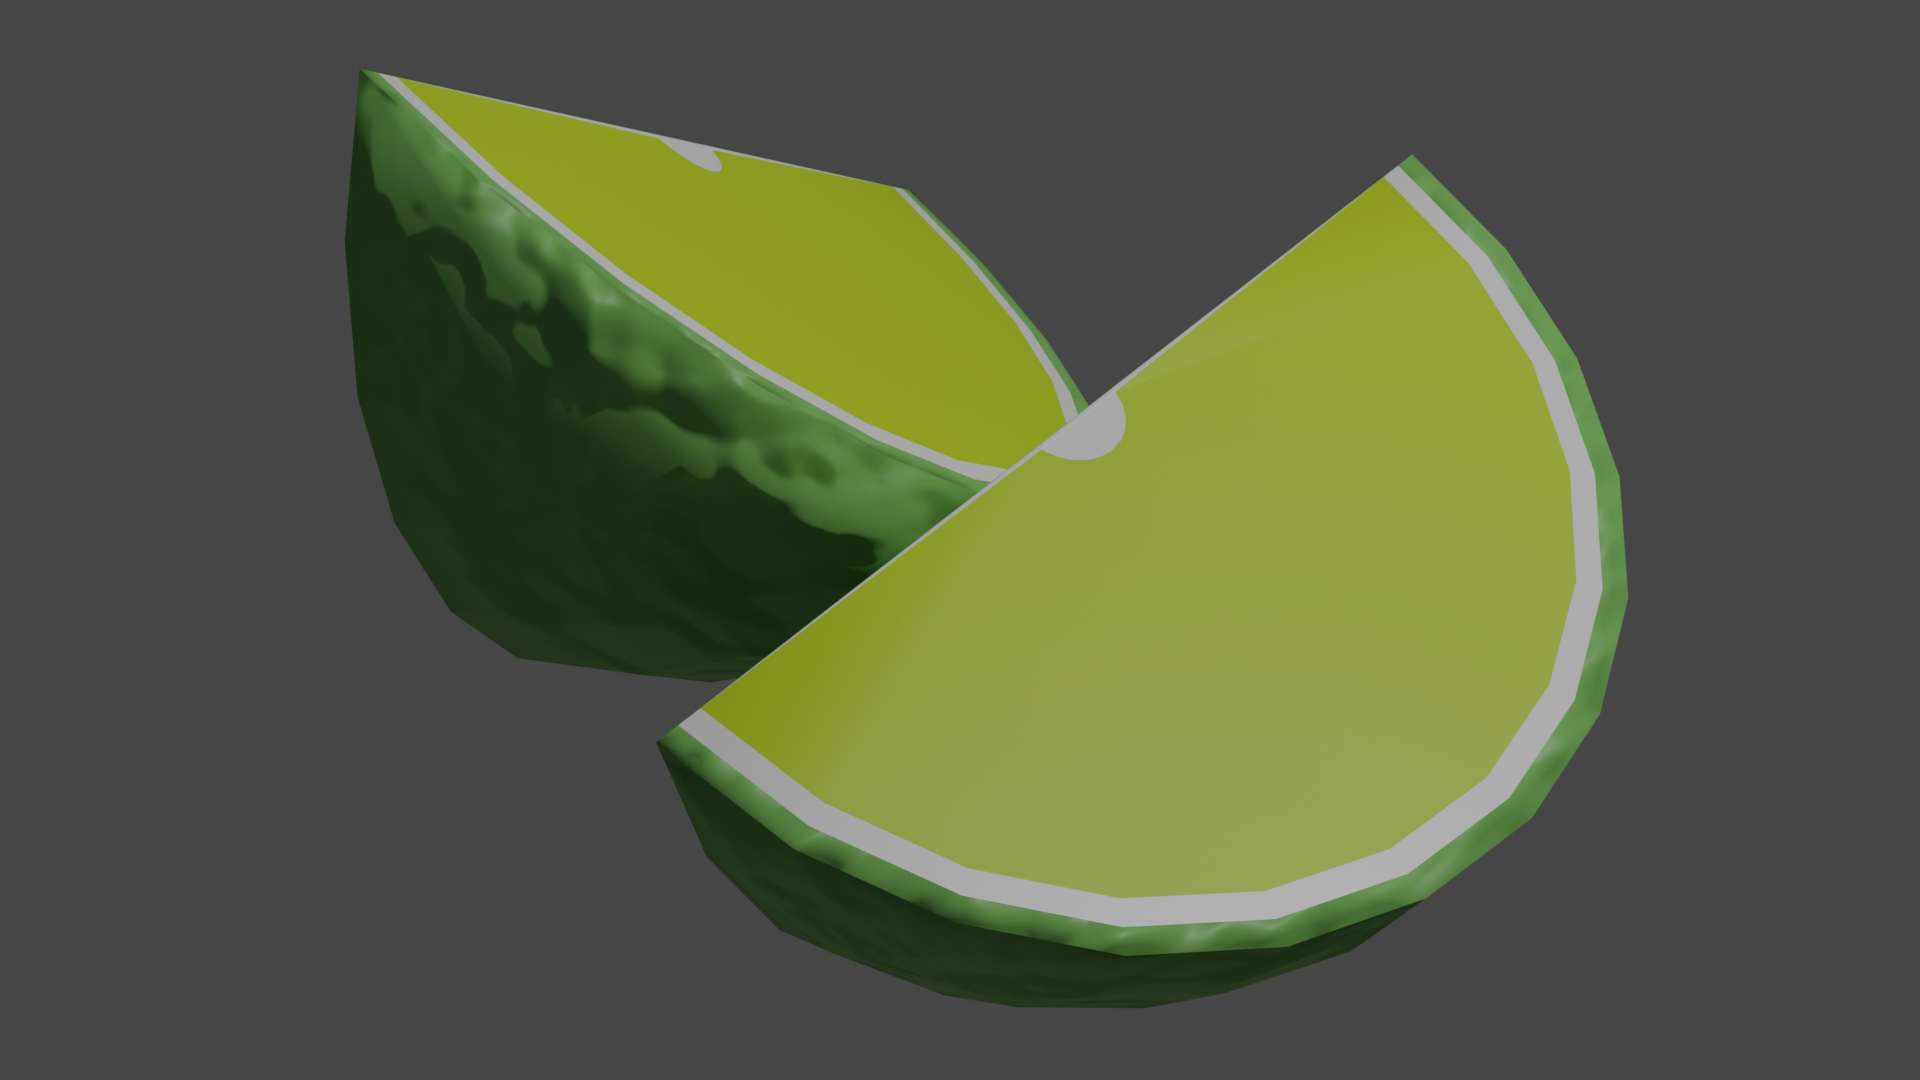 images/gallery/renders/garnish_lime.png